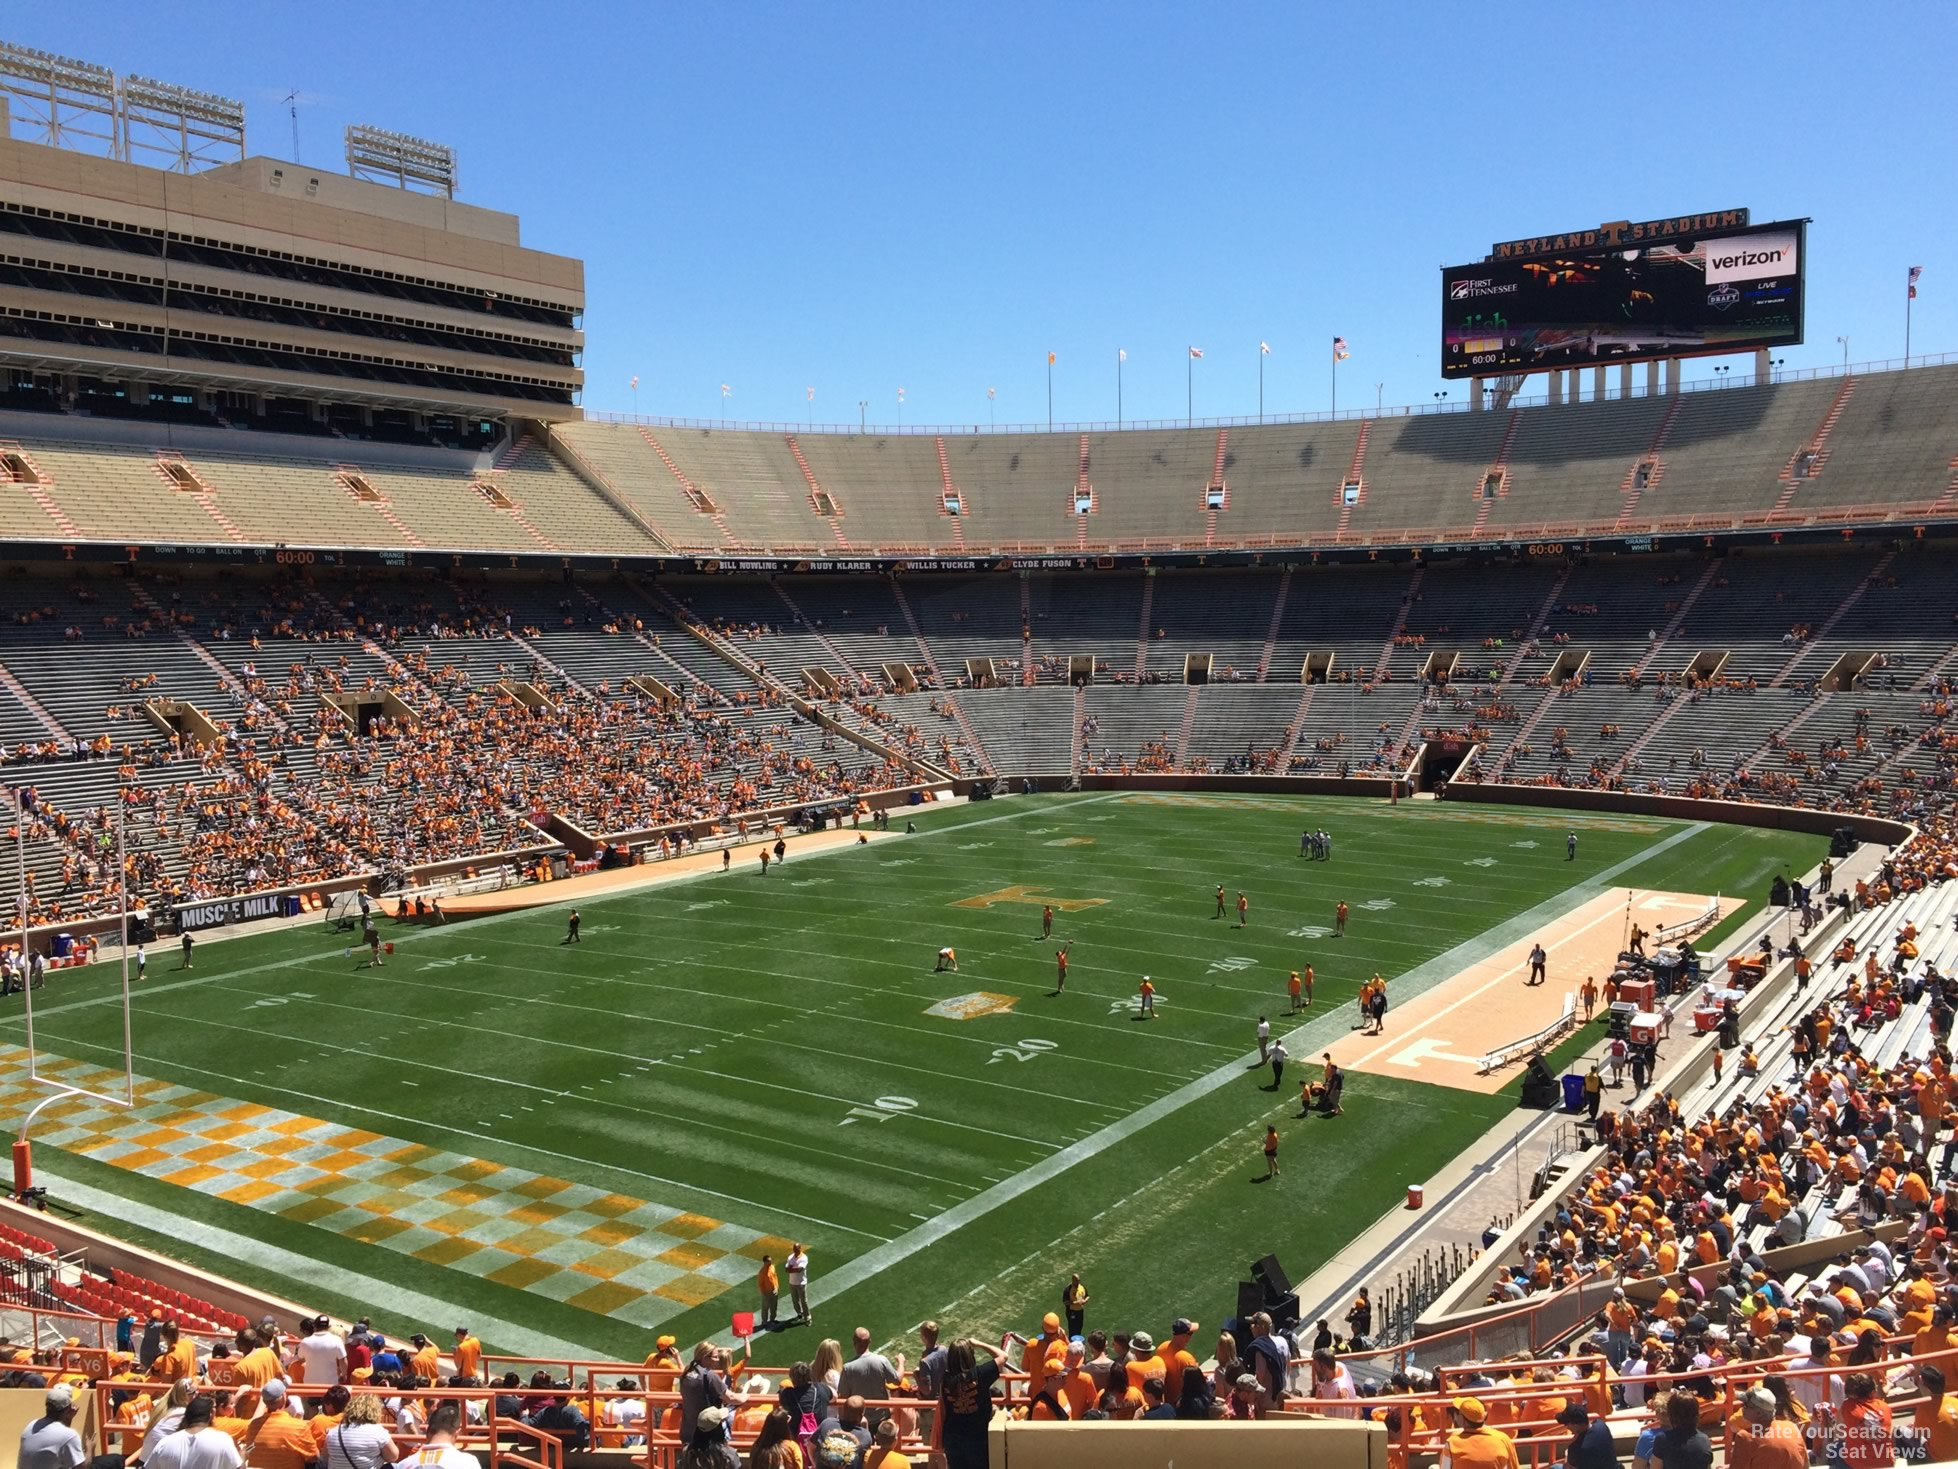 Neyland Seating Chart With Rows